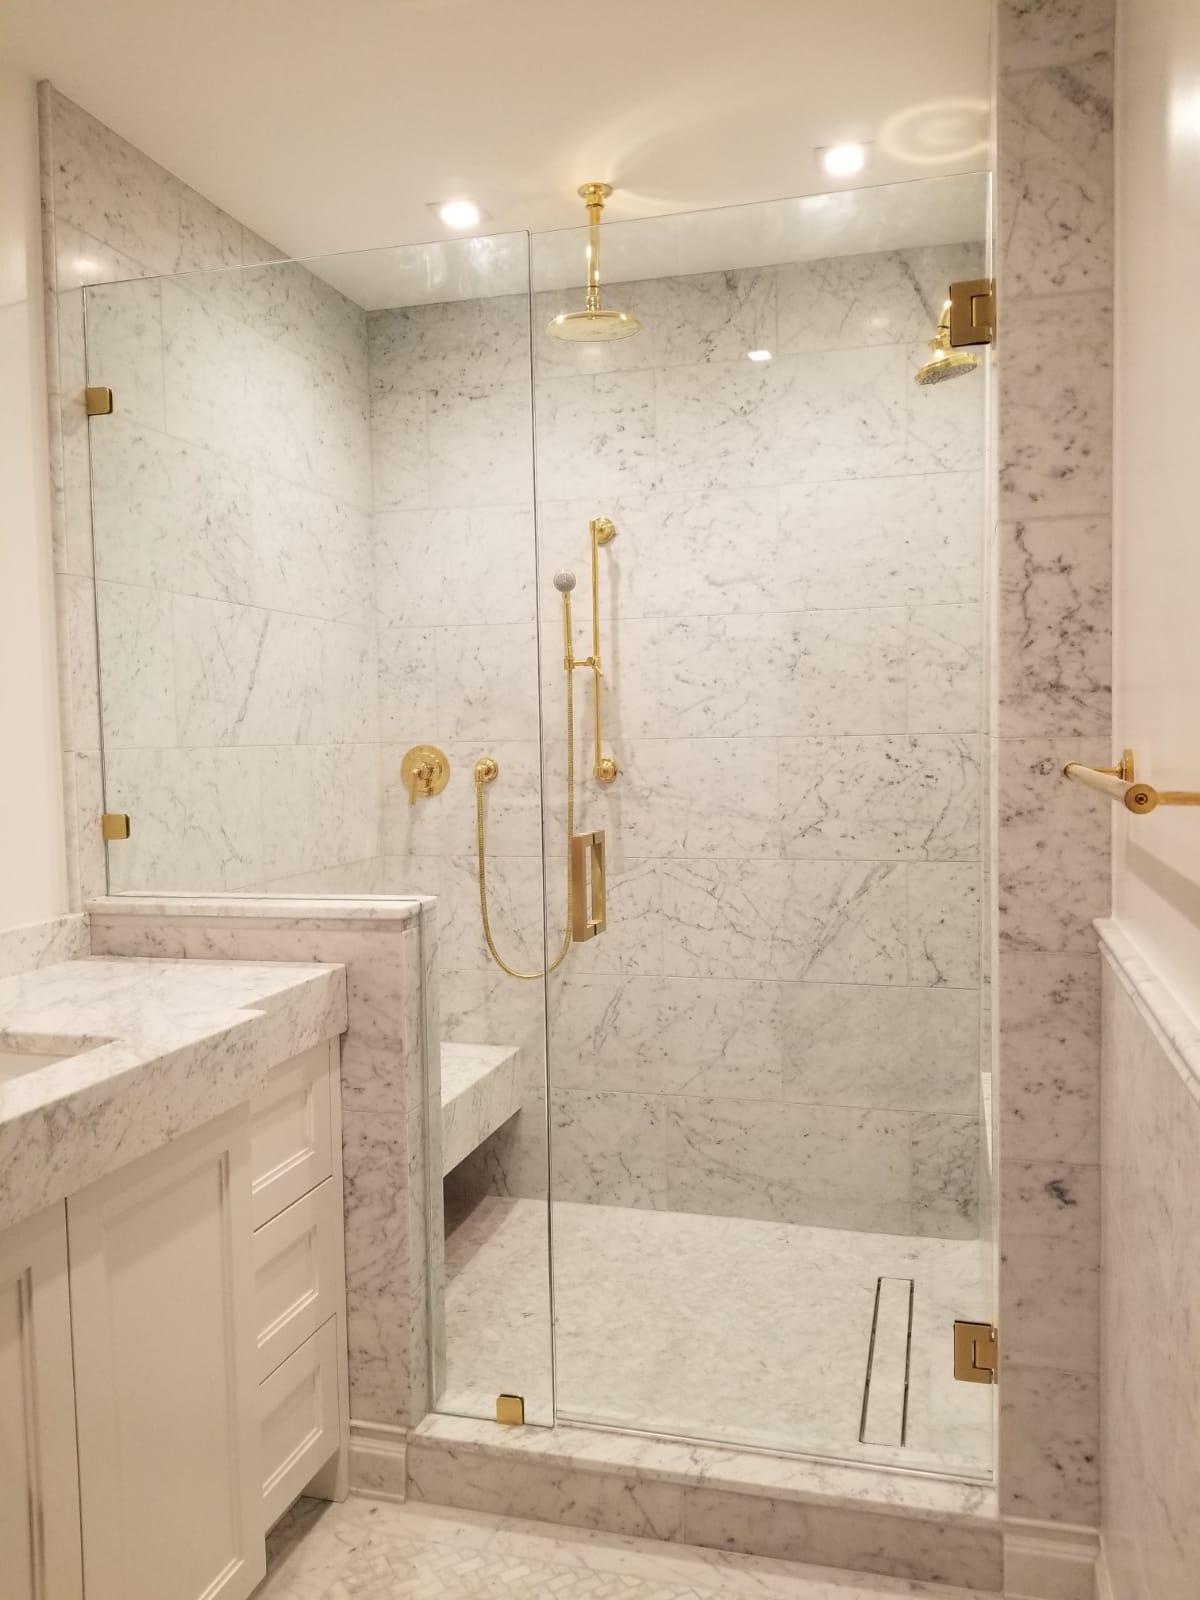 11 Styles of Shower Doors and Glass Options